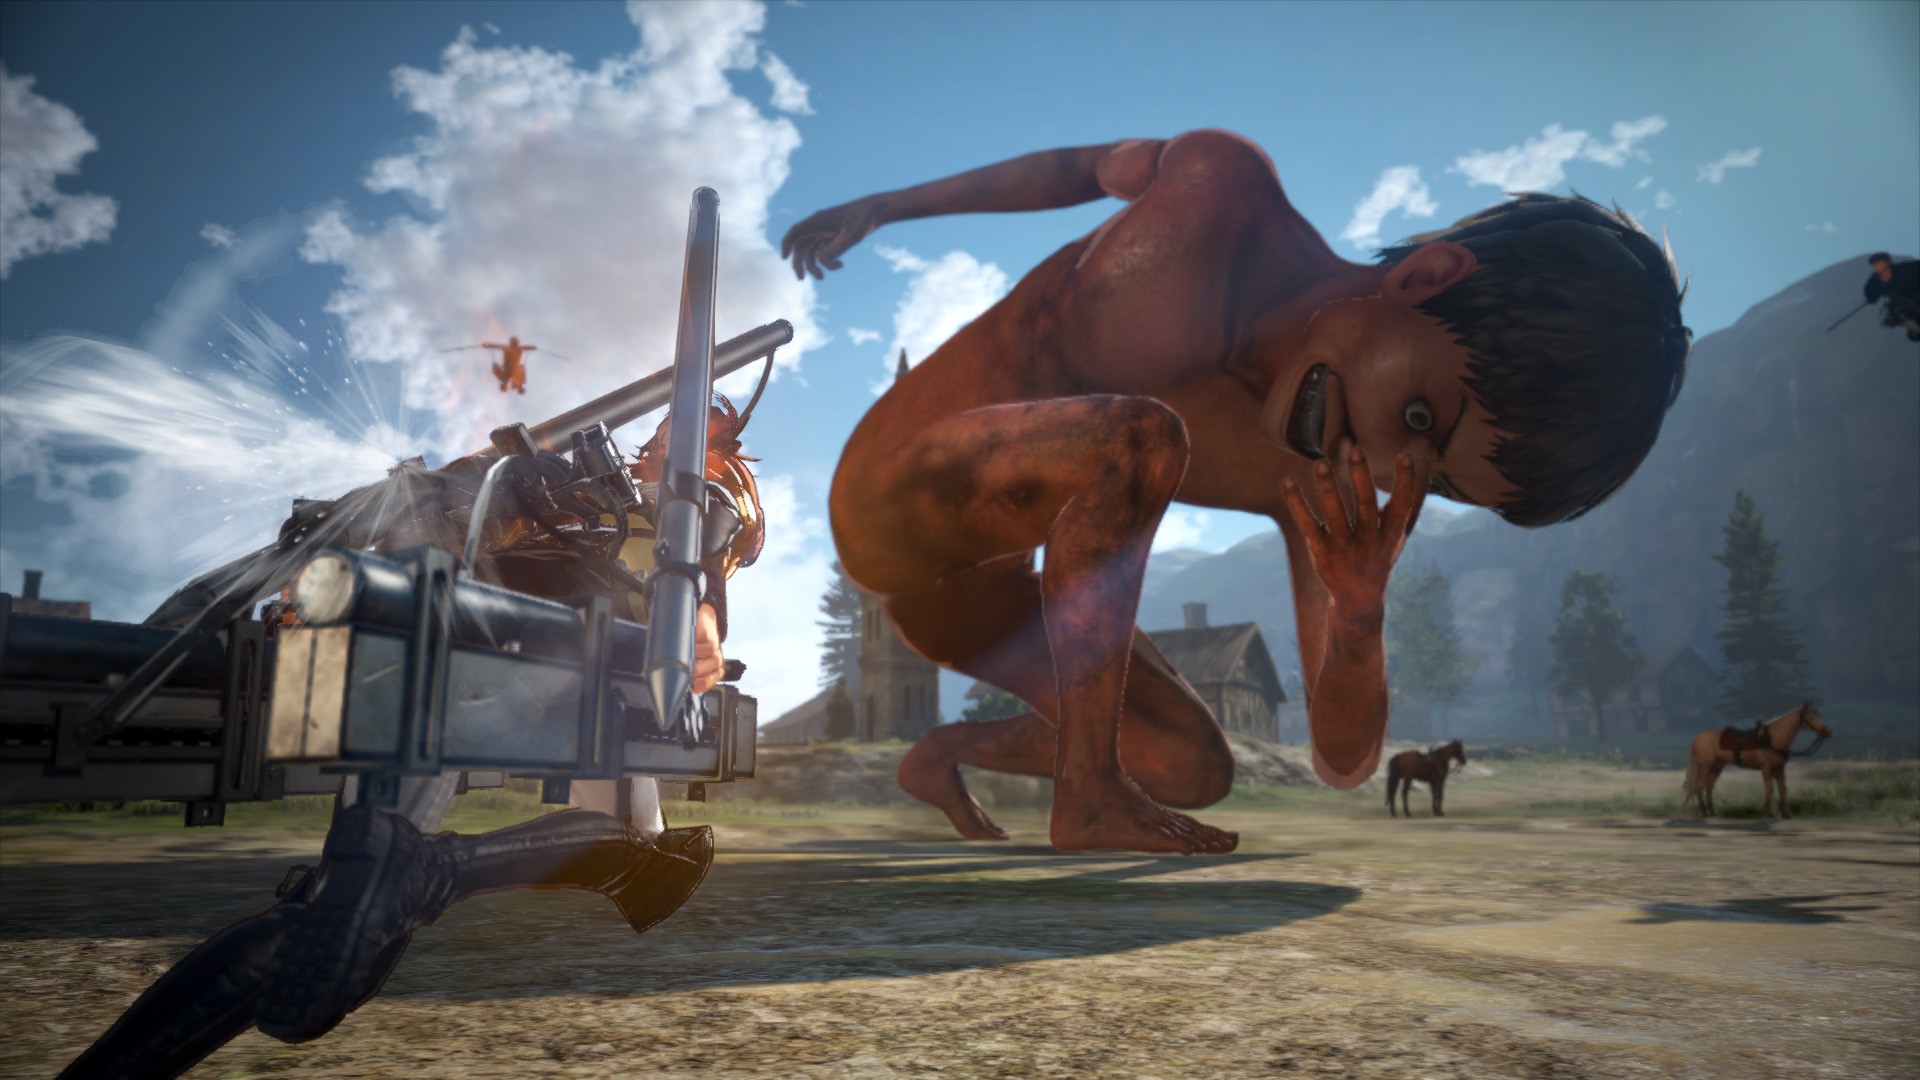 Attack on Titan Is Overdue for a New Game